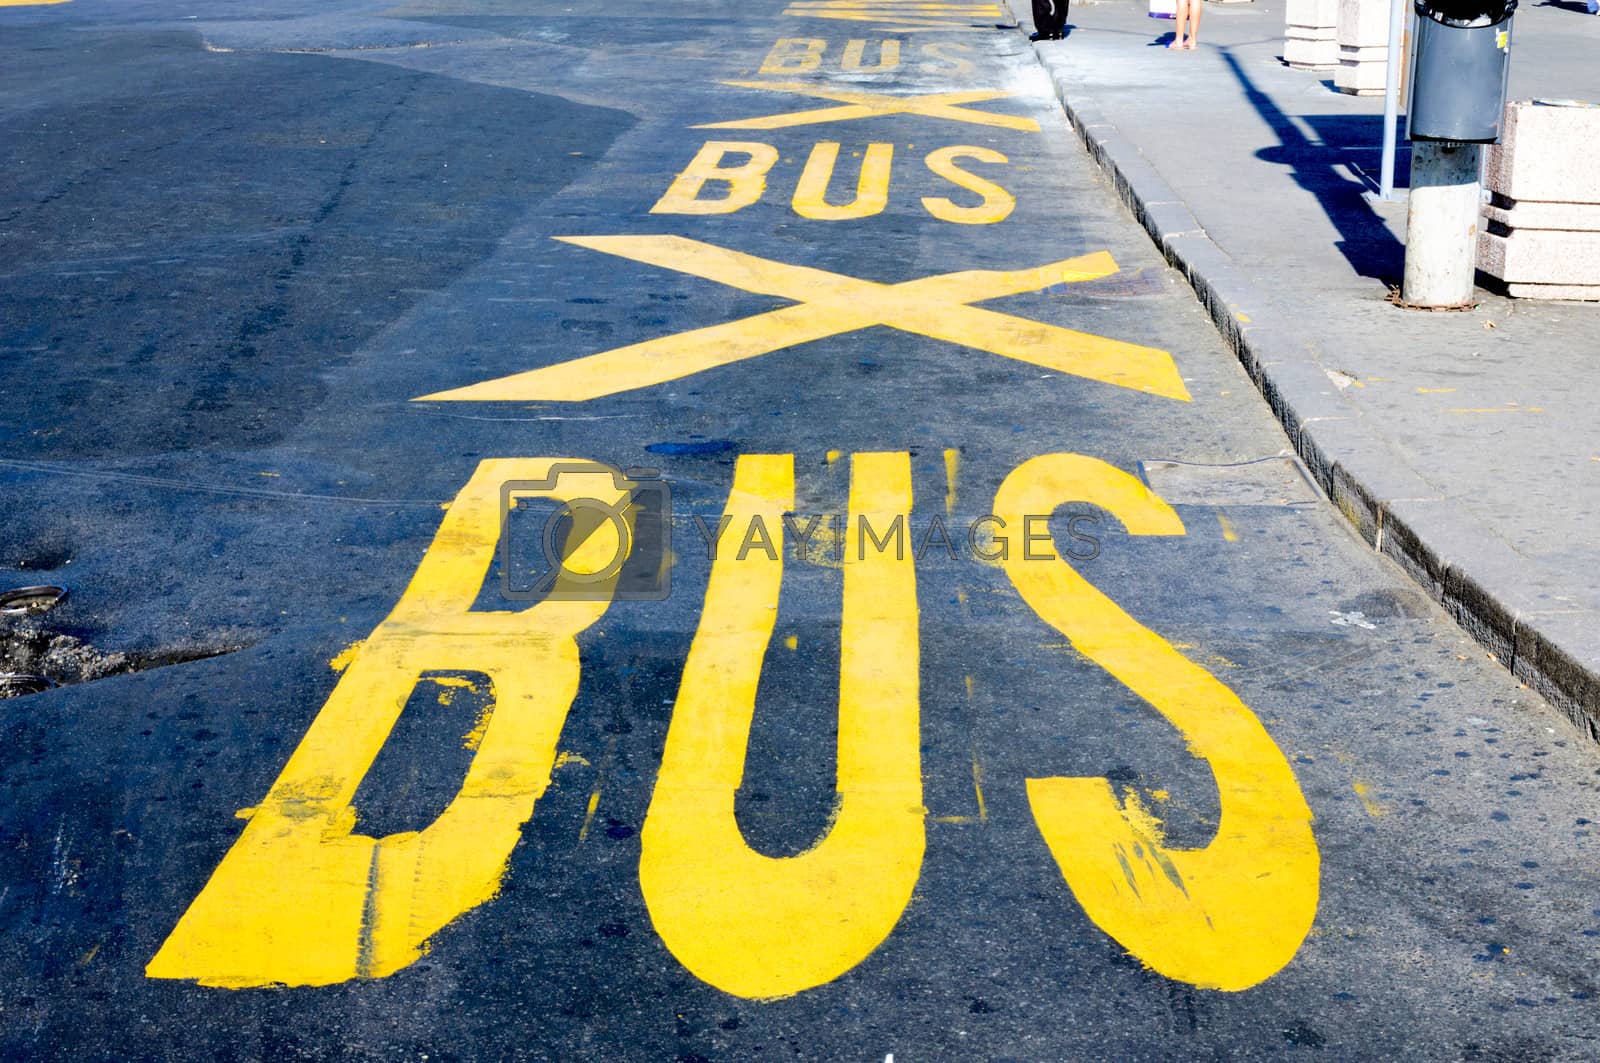 Signs for the bus stations